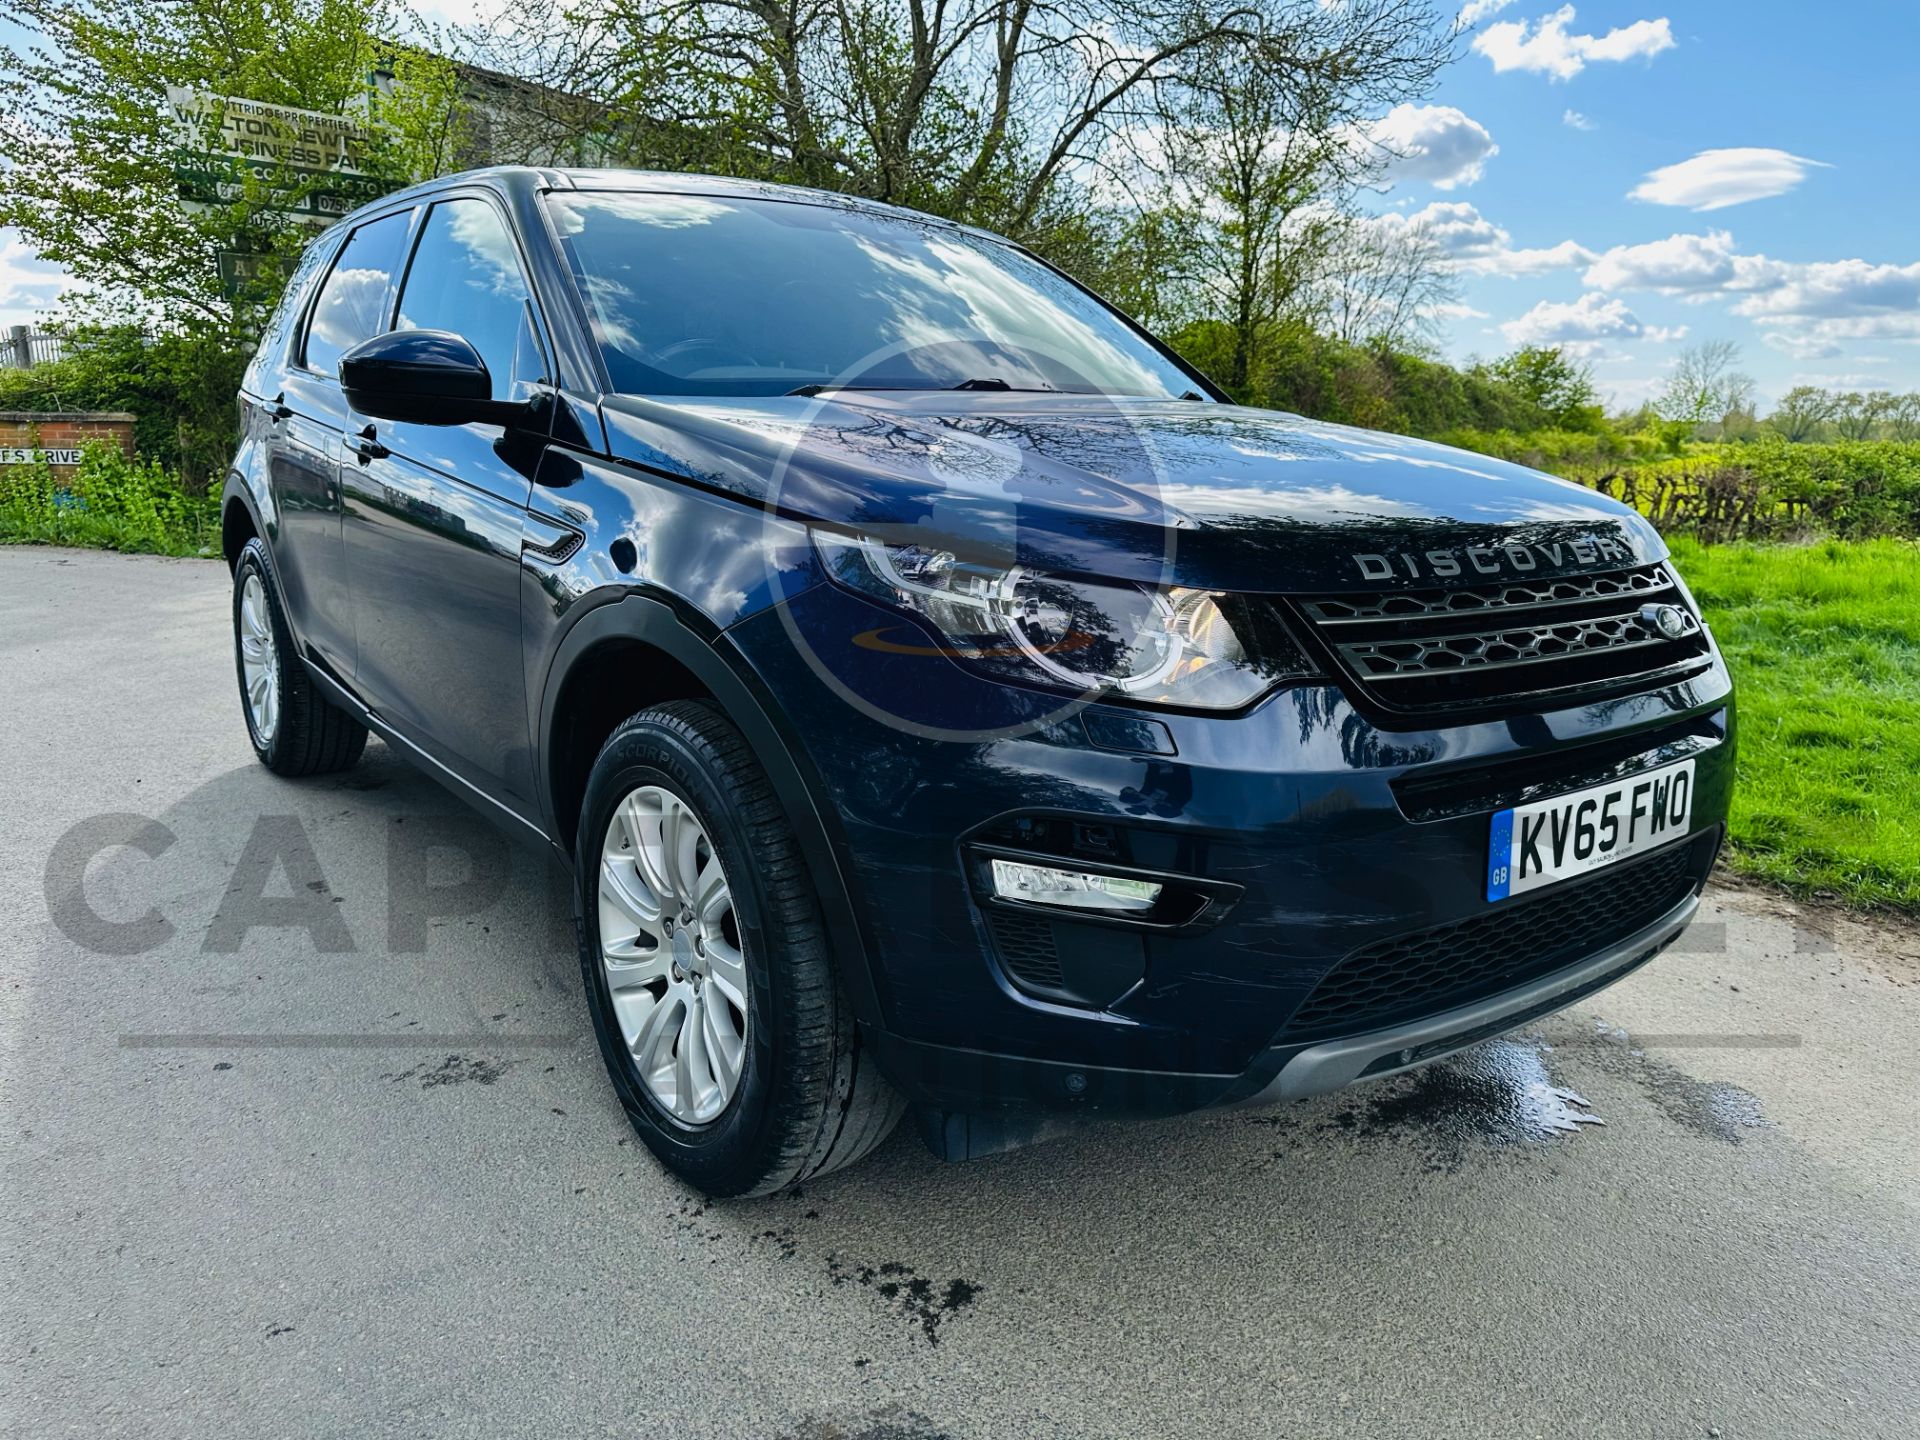 (ON SALE) LAND ROVER DISCOVERY SPORT *SE TECH* 7 SEATER SUV (2016 - EURO 6) 2.0 TD4 - (NO VAT) - Image 2 of 40